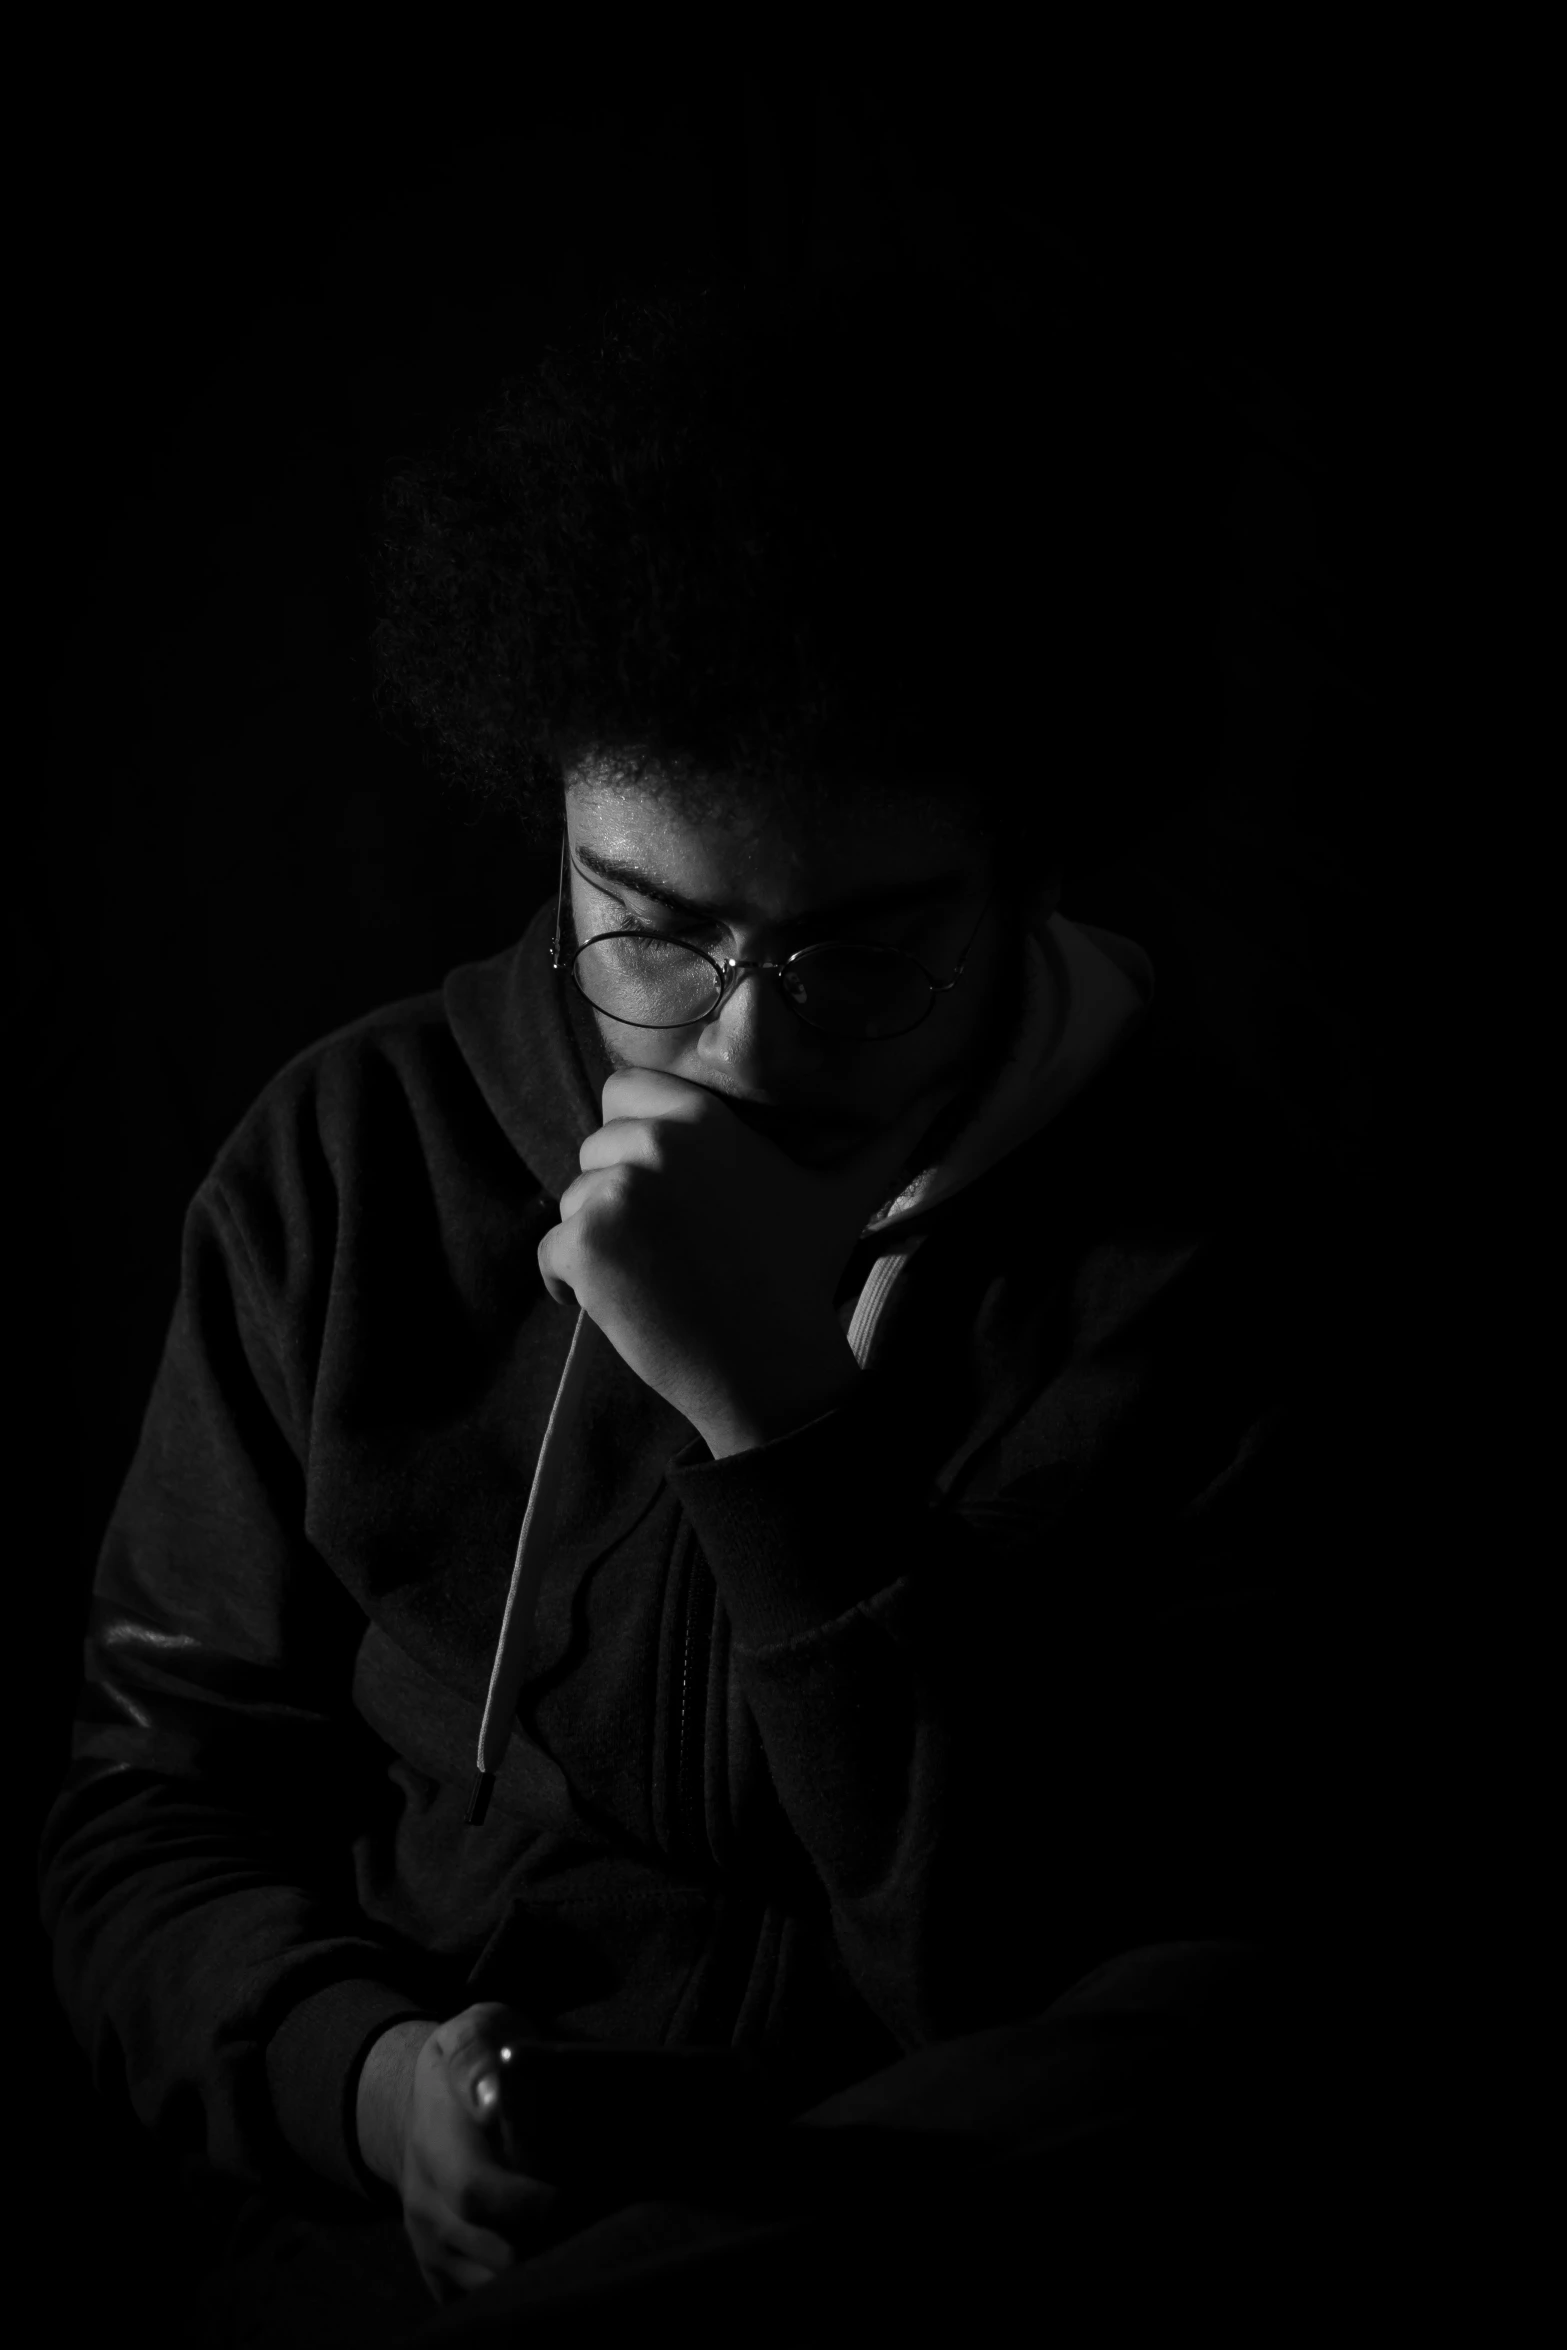 a woman with an afro and glasses in a dark background